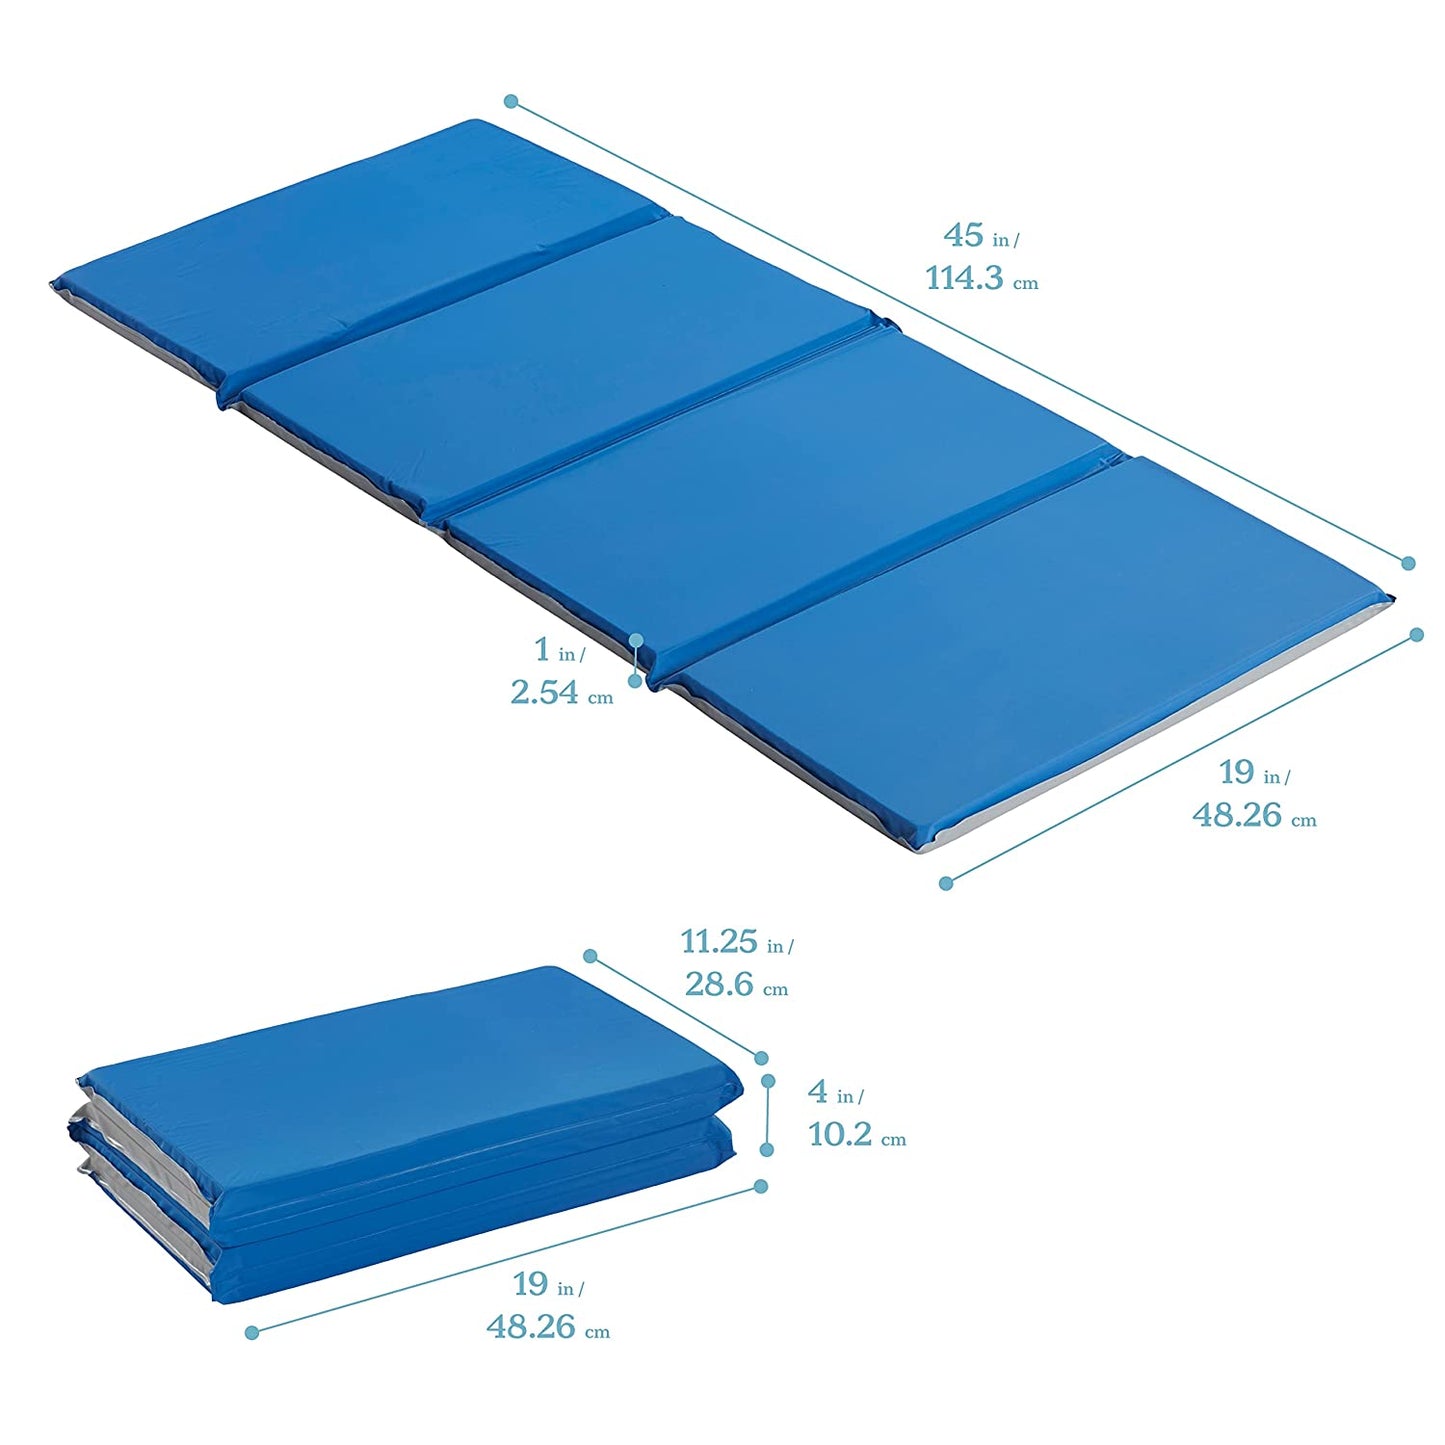 Everyday Folding Rest Mat, 4-Section, 1In, Sleeping Pad, Blue/Grey, 5-Pack